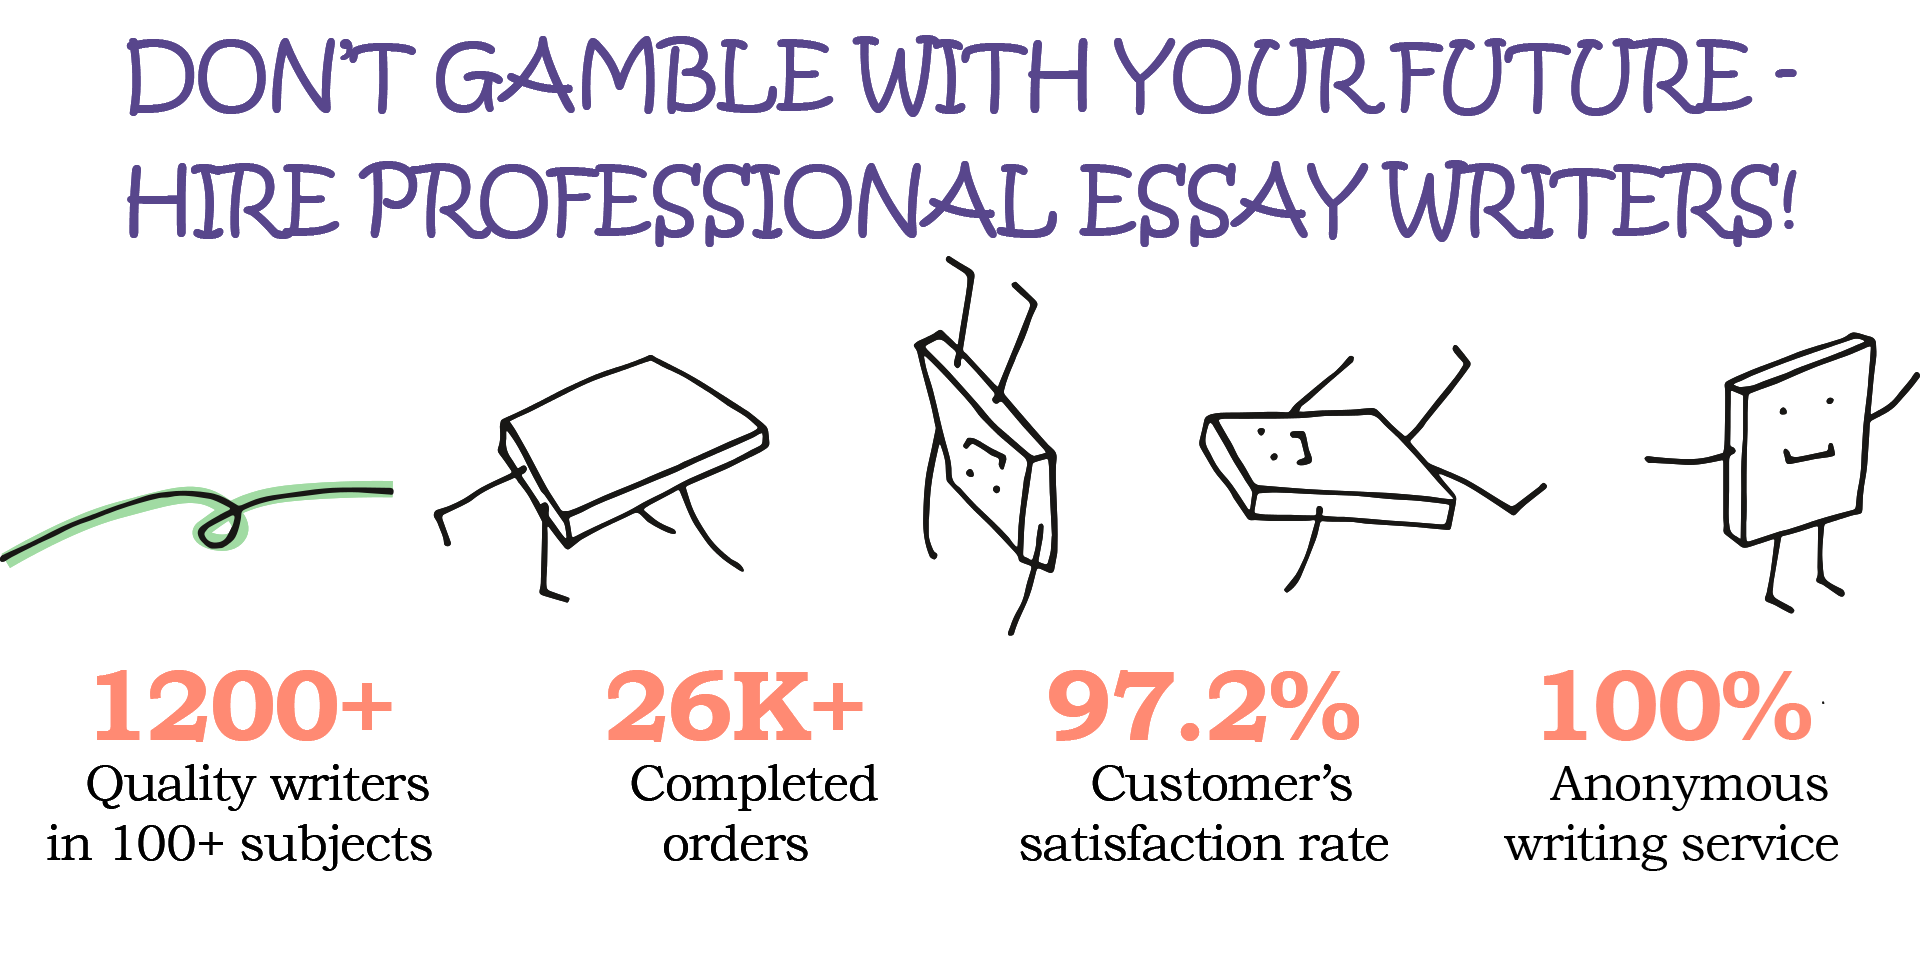 Building Relationships With essay writing services